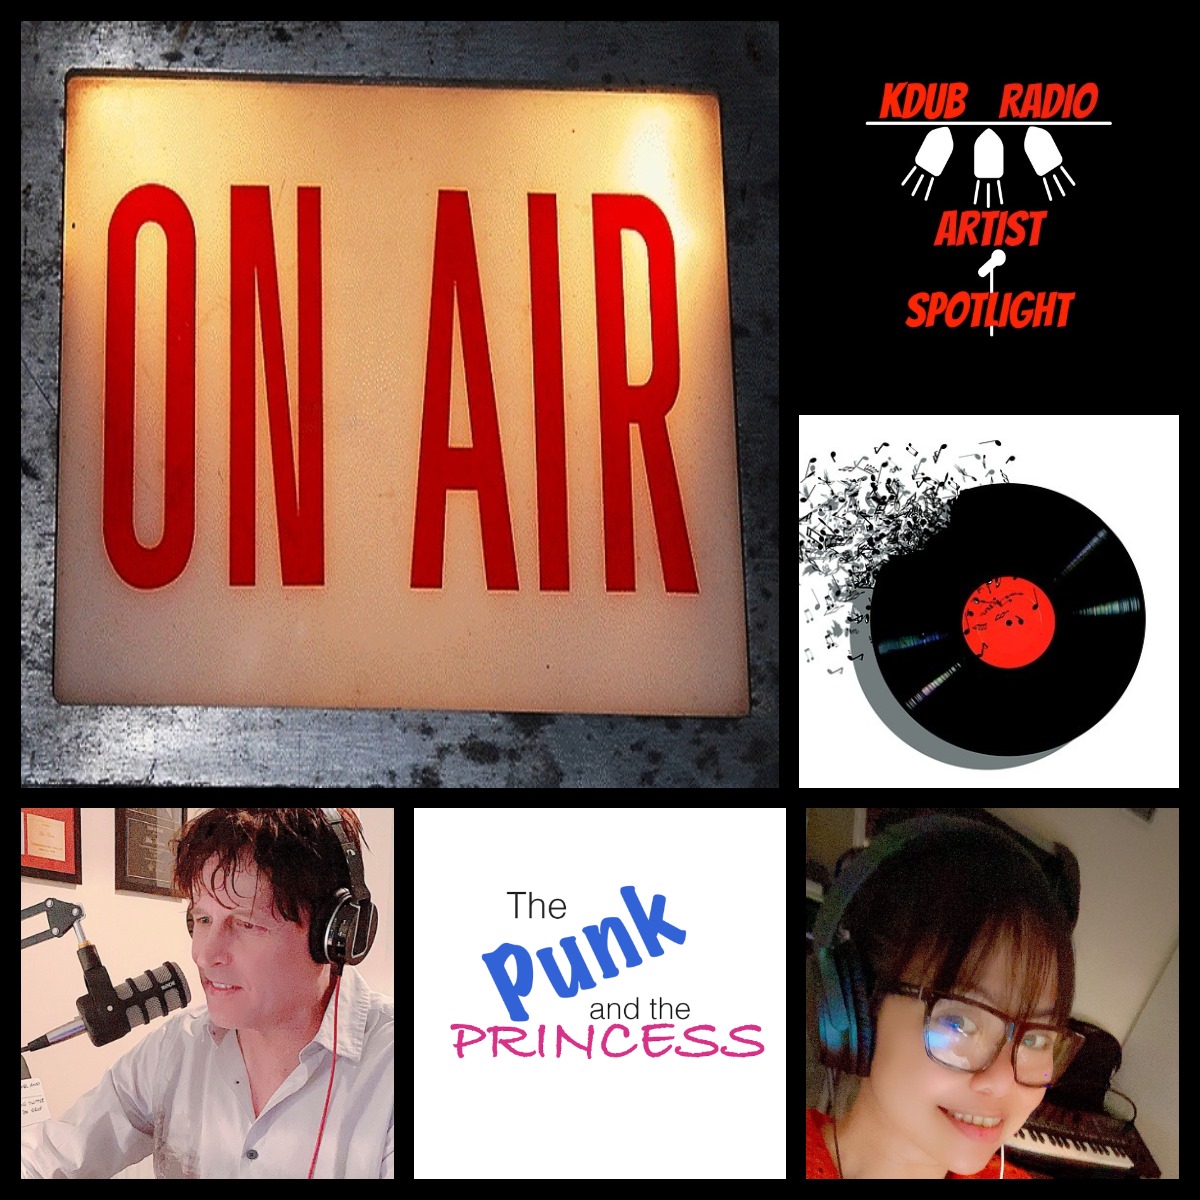 Join us now for The Punk and the Princess Radio Show on KDUB Radio's Artist Spotlight. kdubradio.com/artist-spotlig… @PunkandPrincess @BDub1199